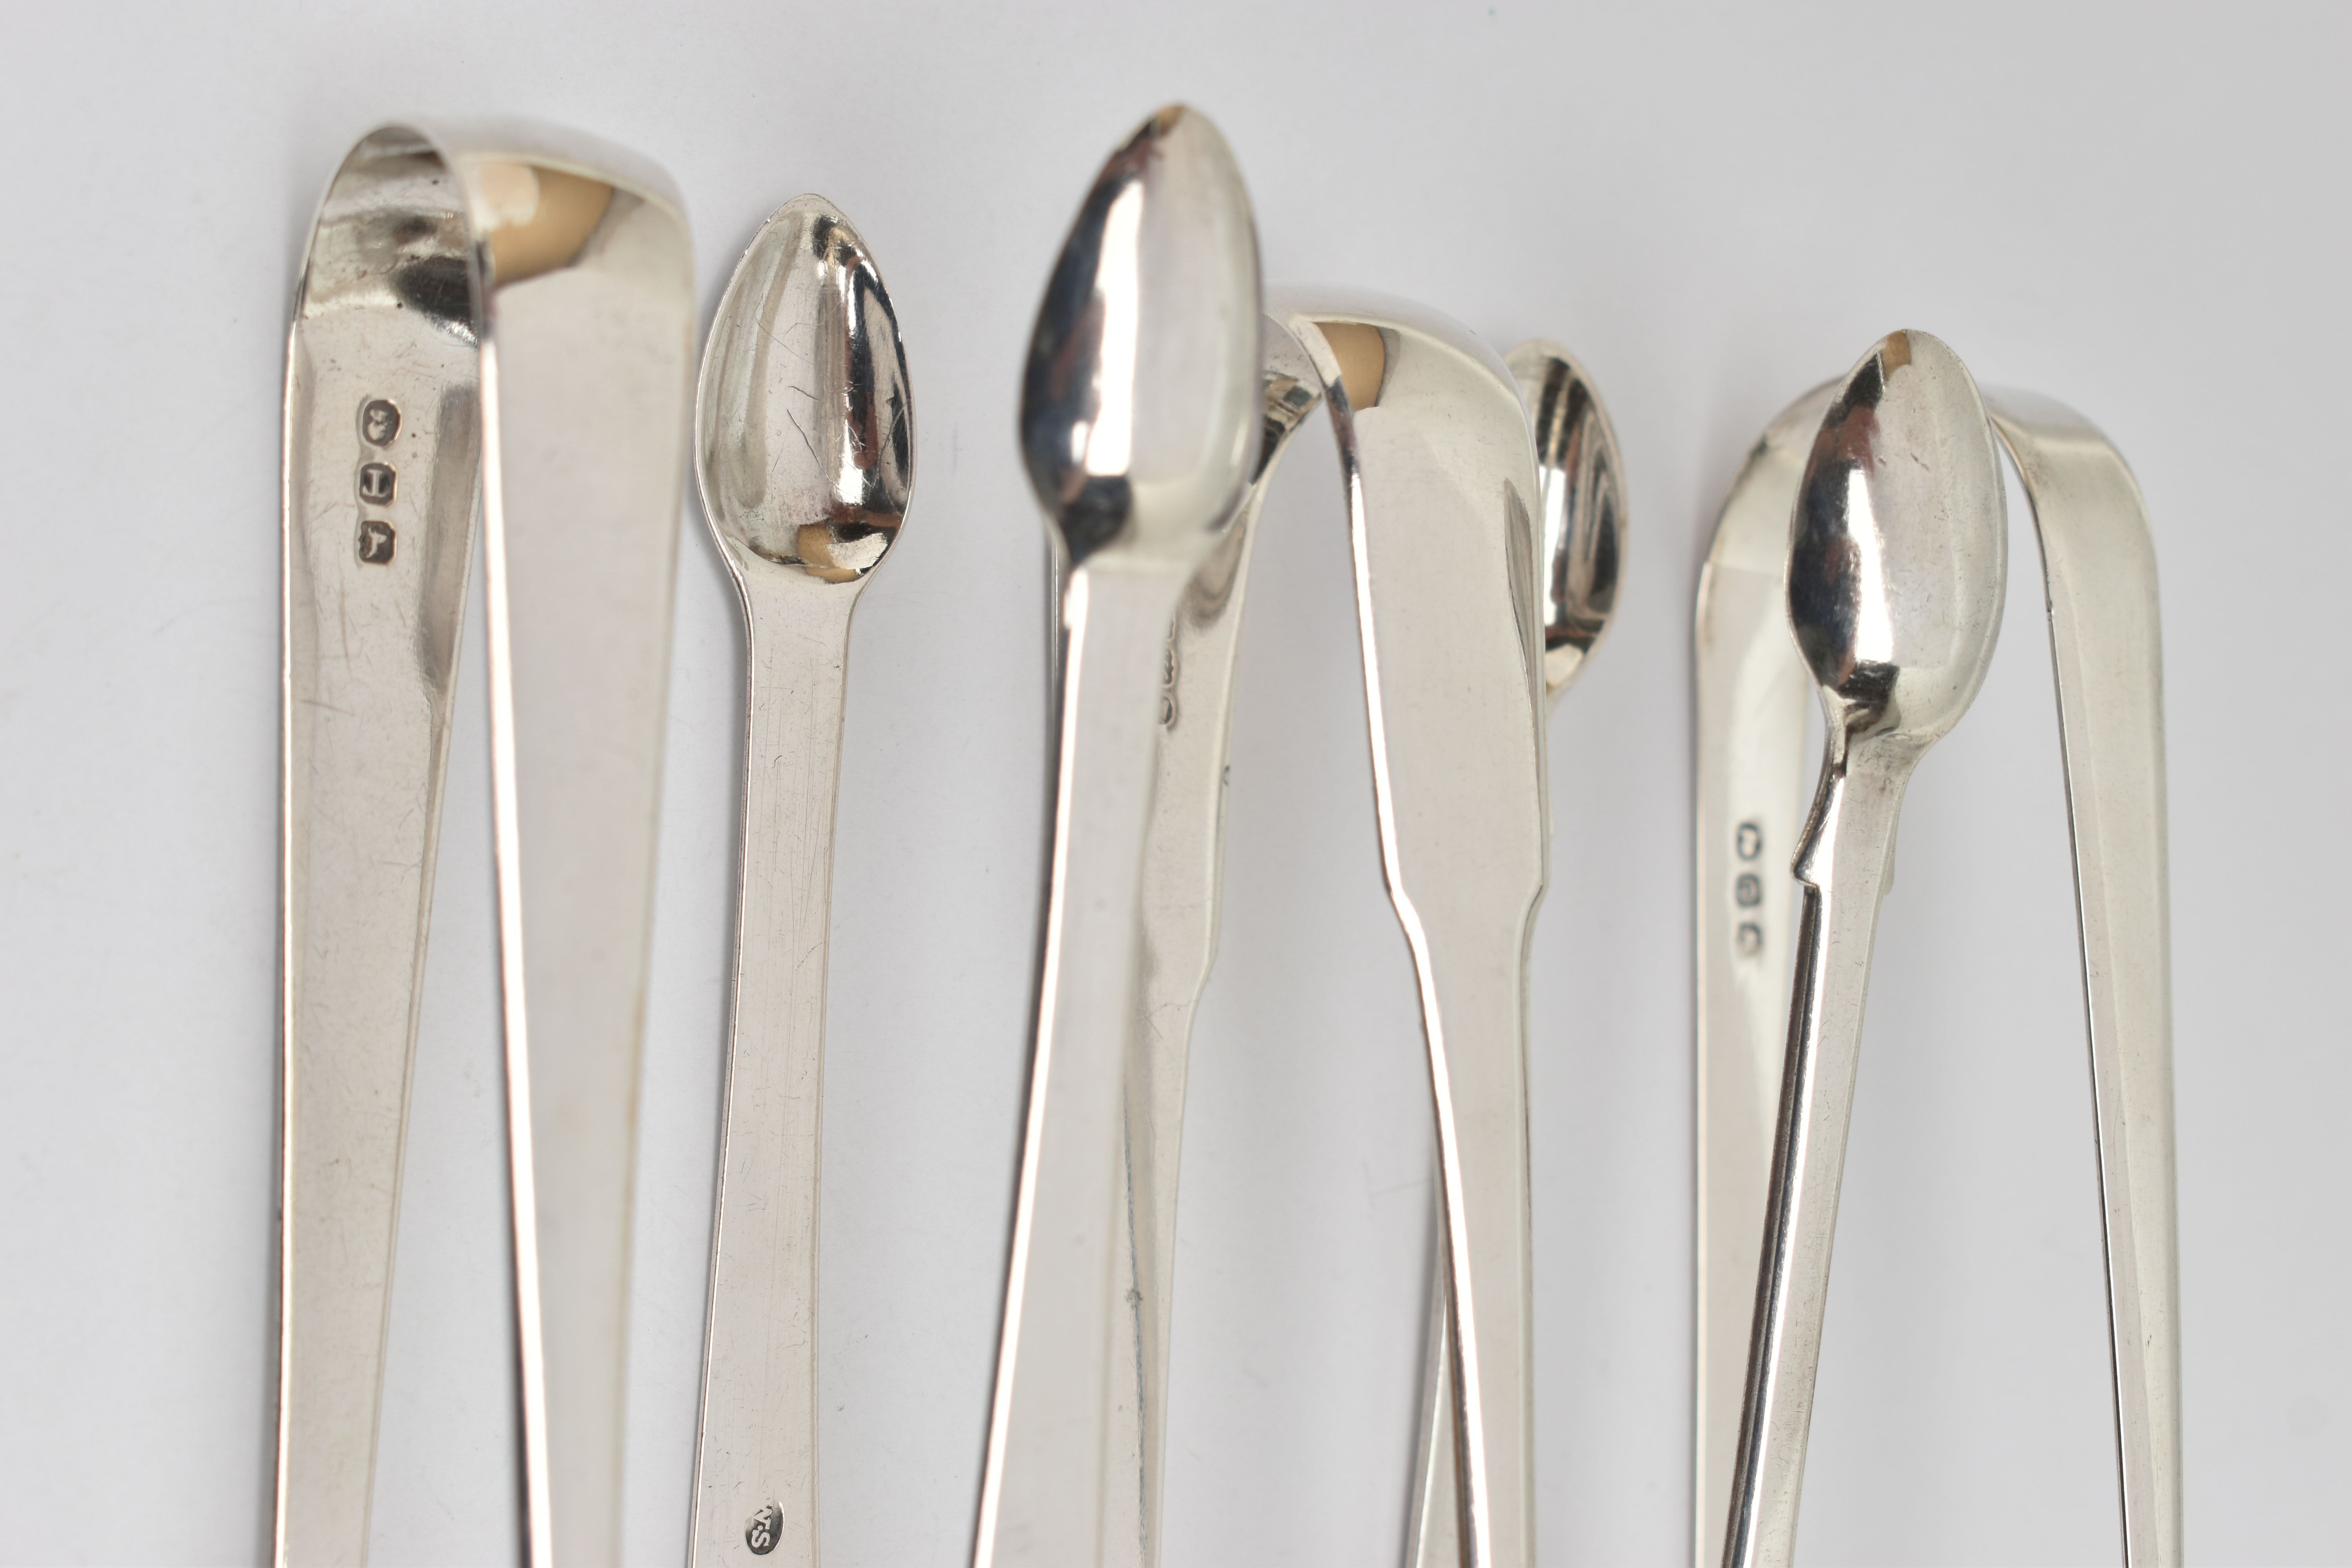 FIVE SILVER SUGAR TONGS, one fiddle pattern sugar tong, hallmarked 'Edward Lees' London 1807, one - Image 2 of 5